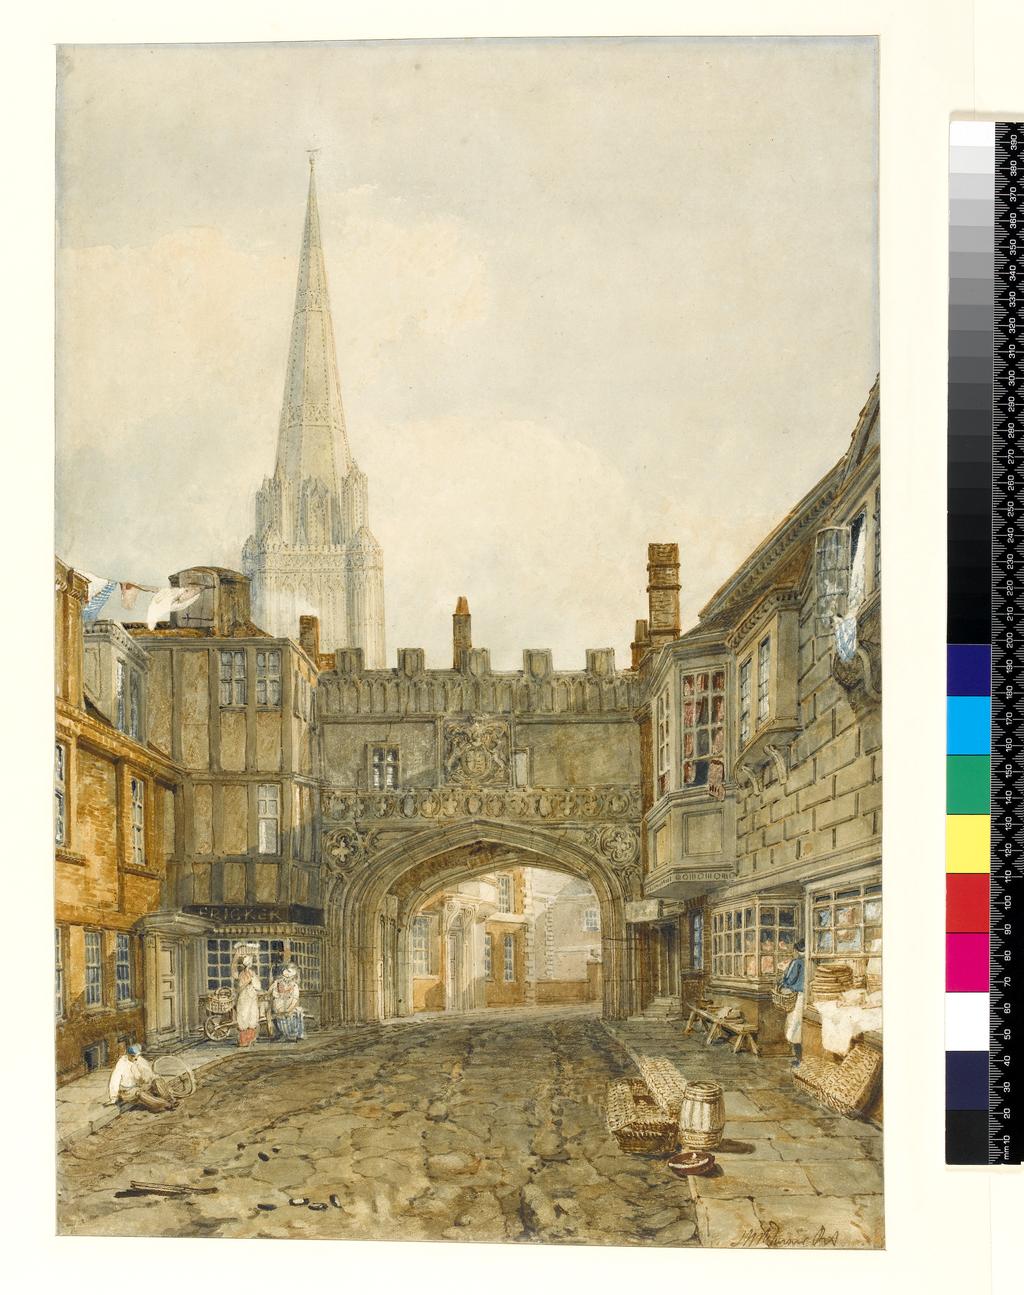 An image of Gateway to the Close, Salisbury. Turner, Joseph Mallord William (British, 1775-1851). Watercolour over graphite with gum arabic on paper, height 456 mm, width 315 mm, 1802.